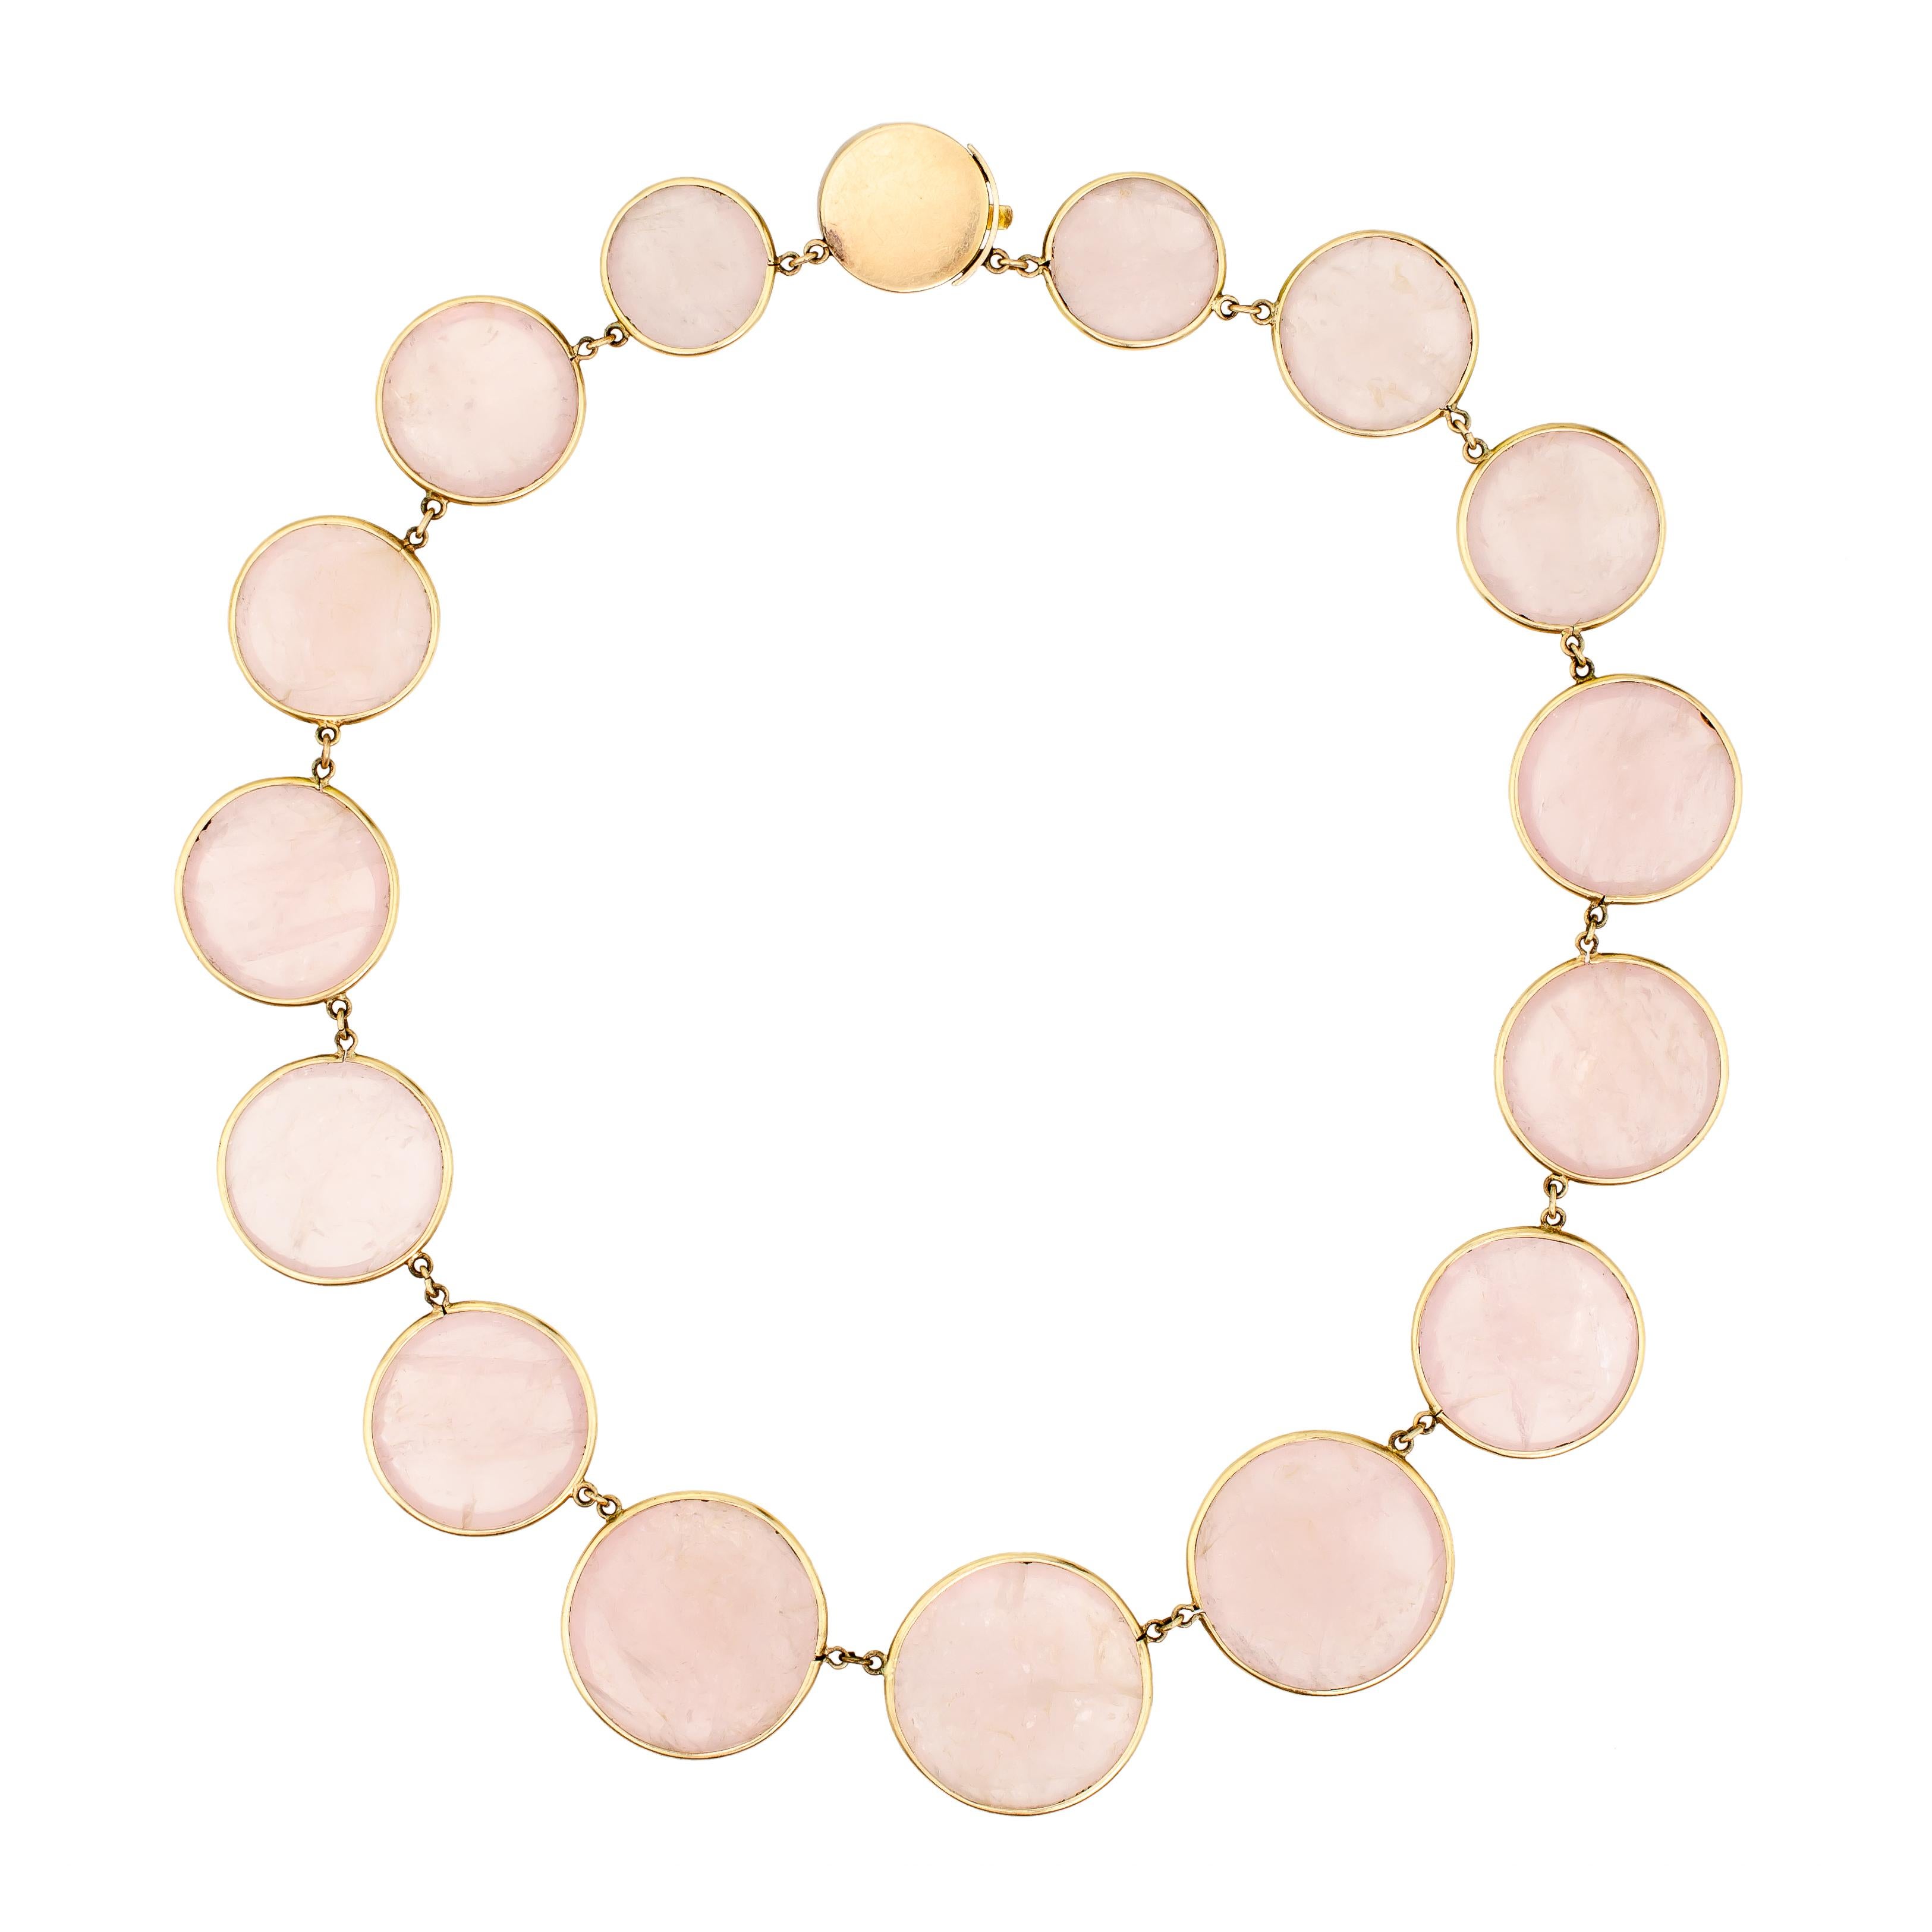 Attractive circa 1970 Rose Quartz and Yellow Gold Necklace In Good Condition For Sale In Lombard, IL